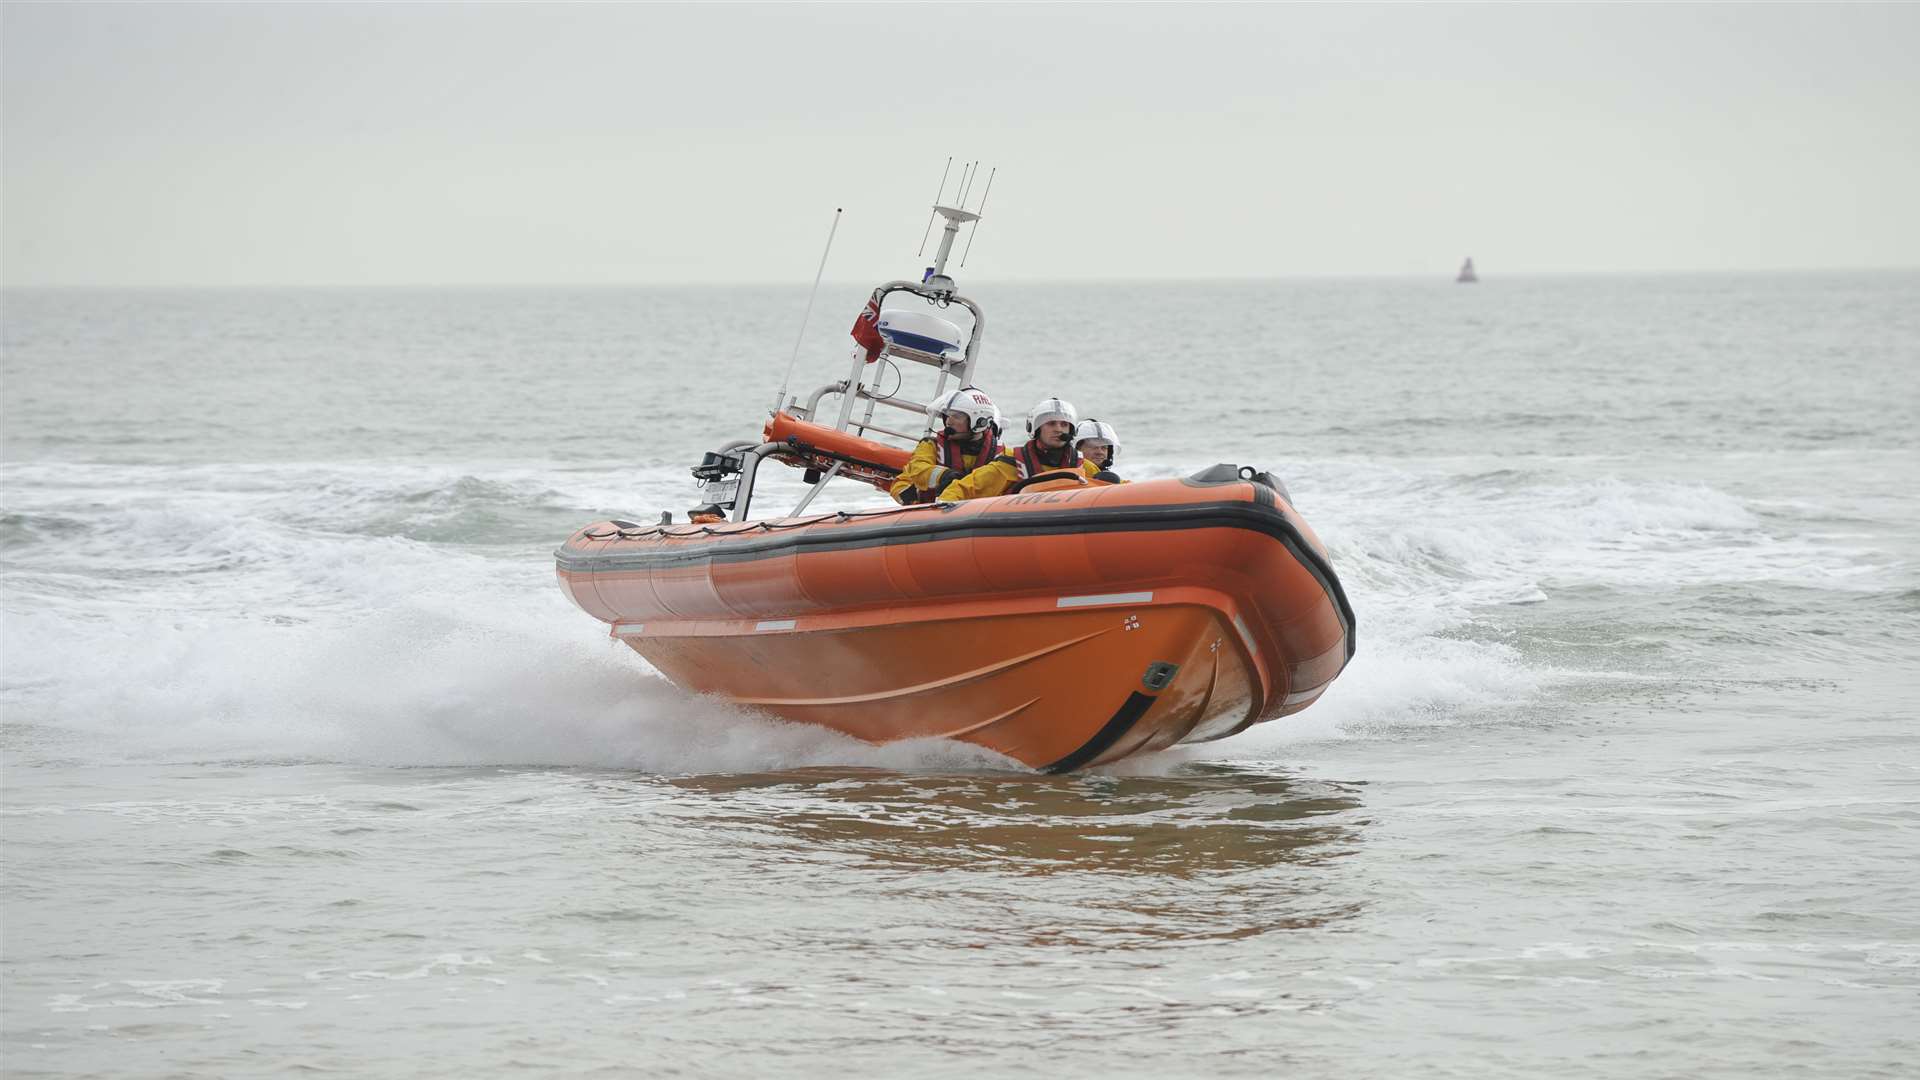 Walmer lifeboat in action. Stock Image.